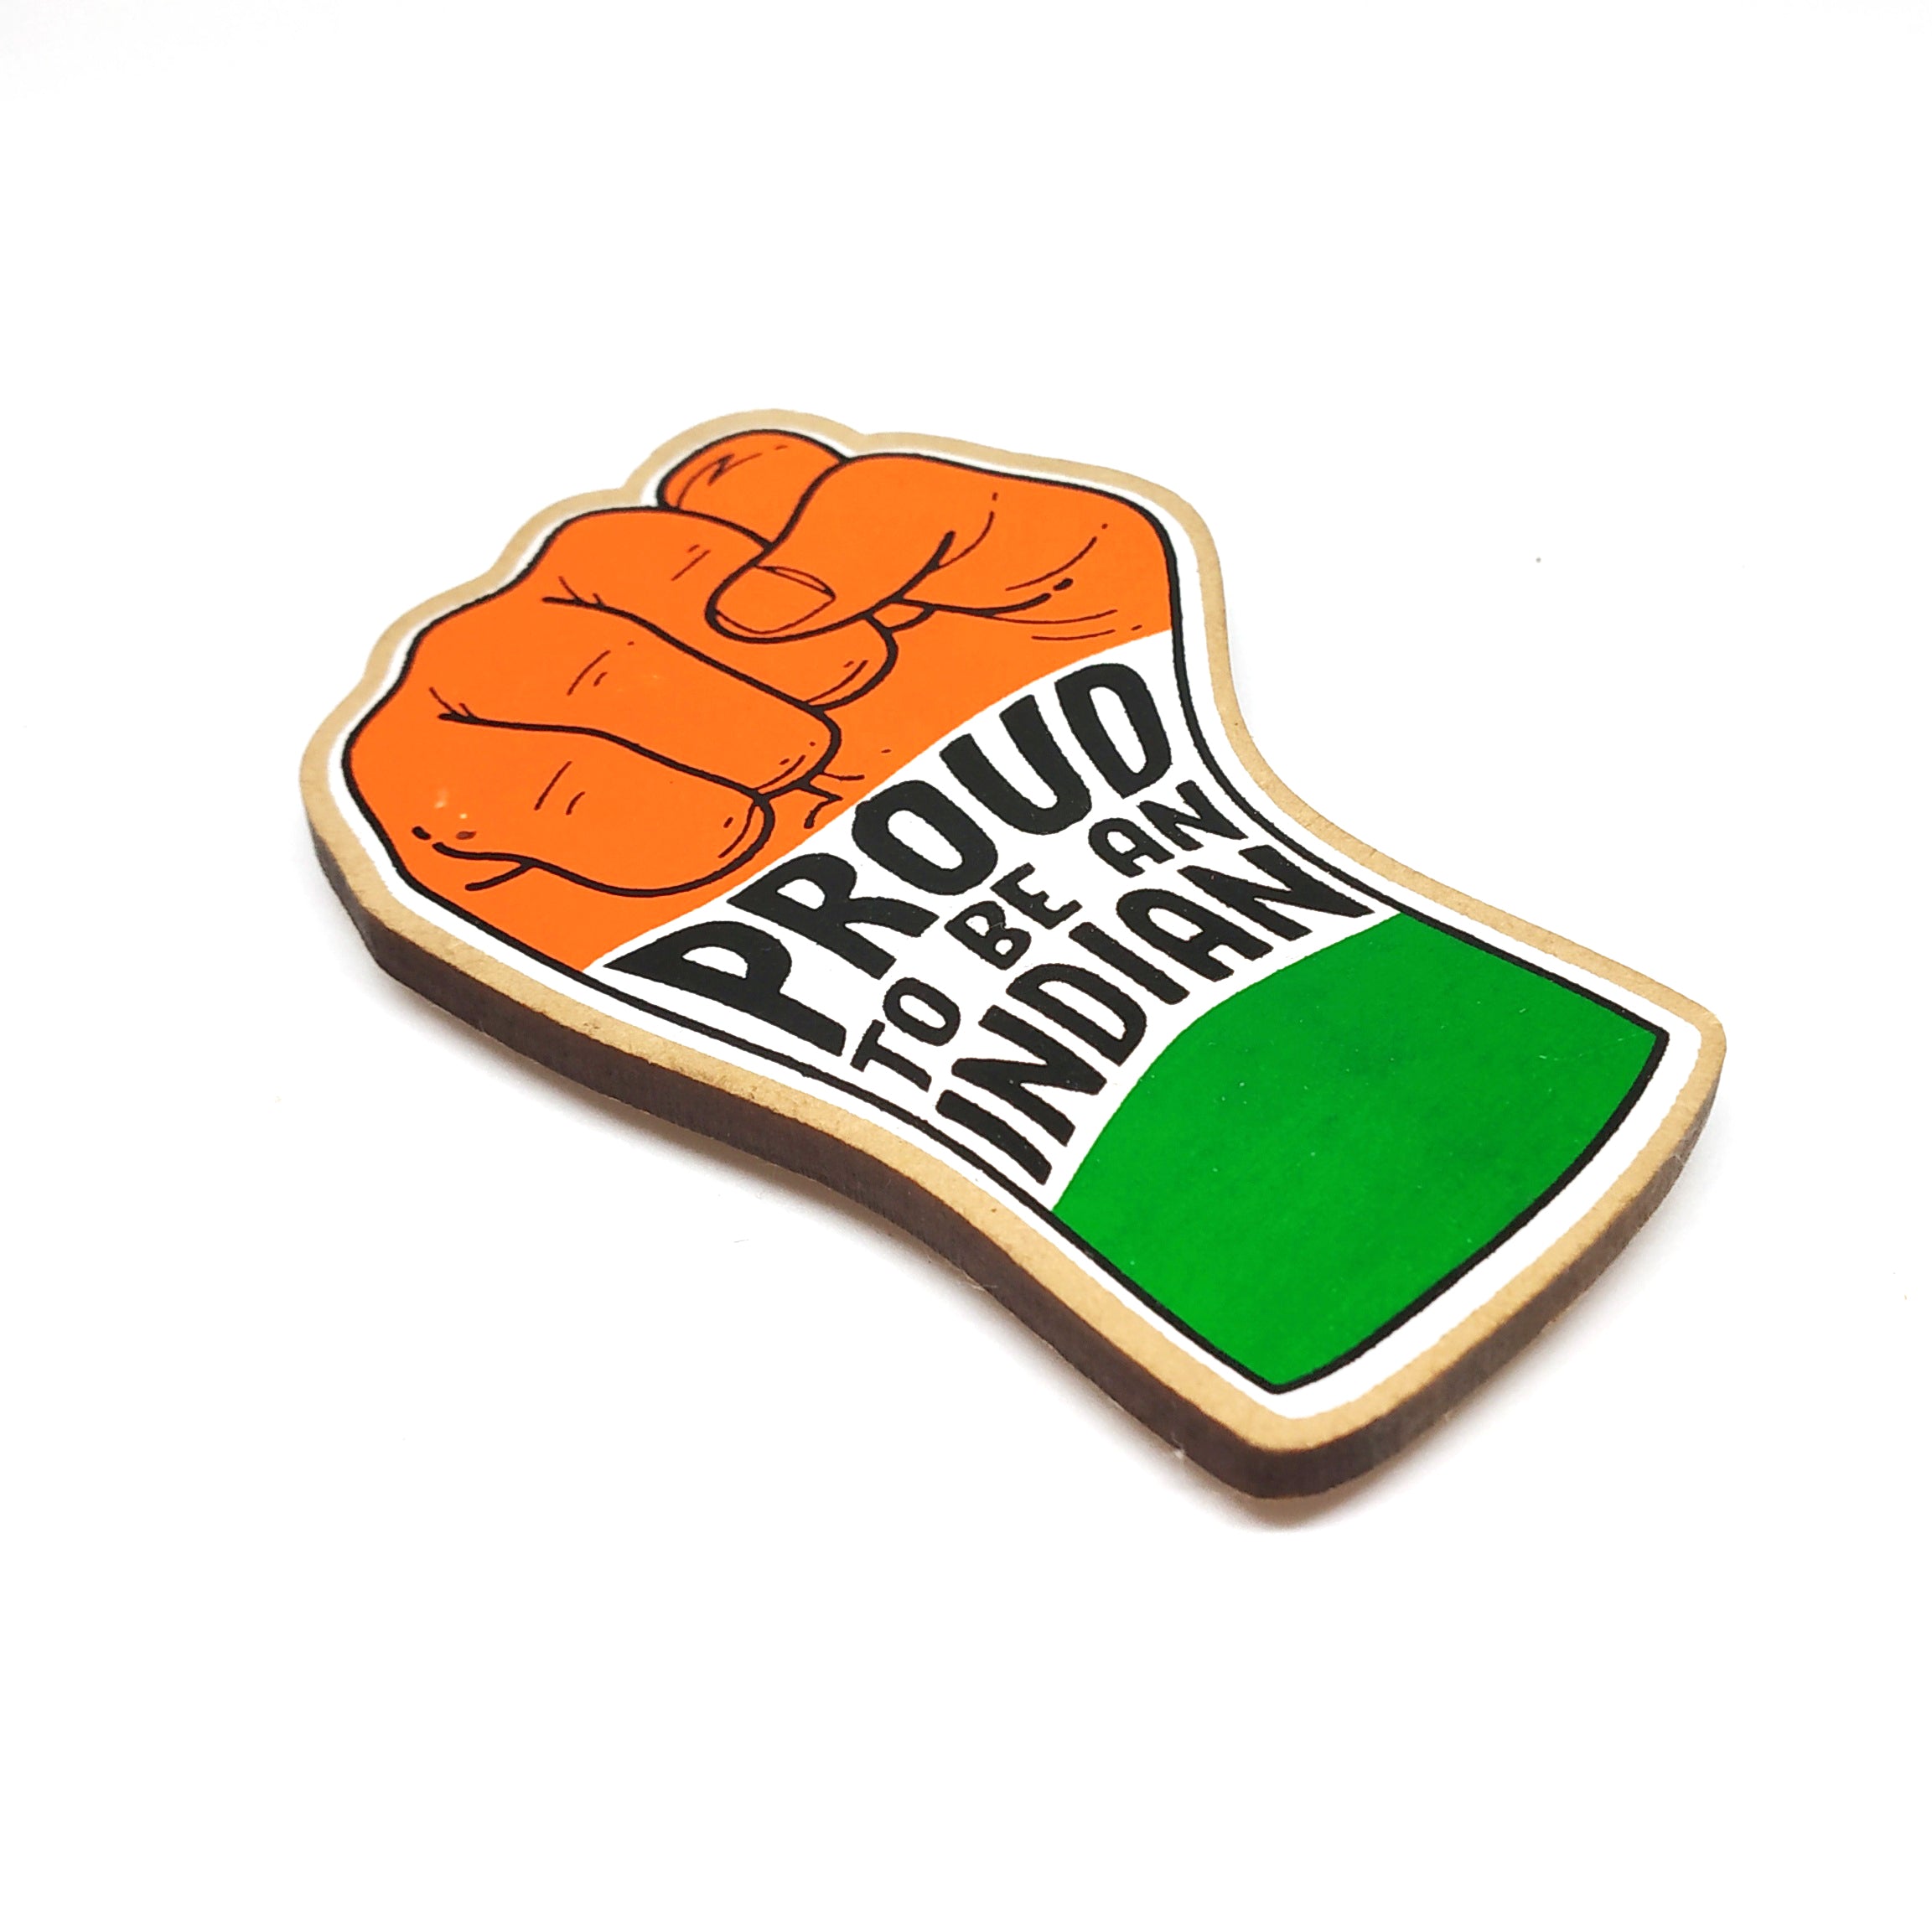 Proud to be an Indian - Fridge Magnet